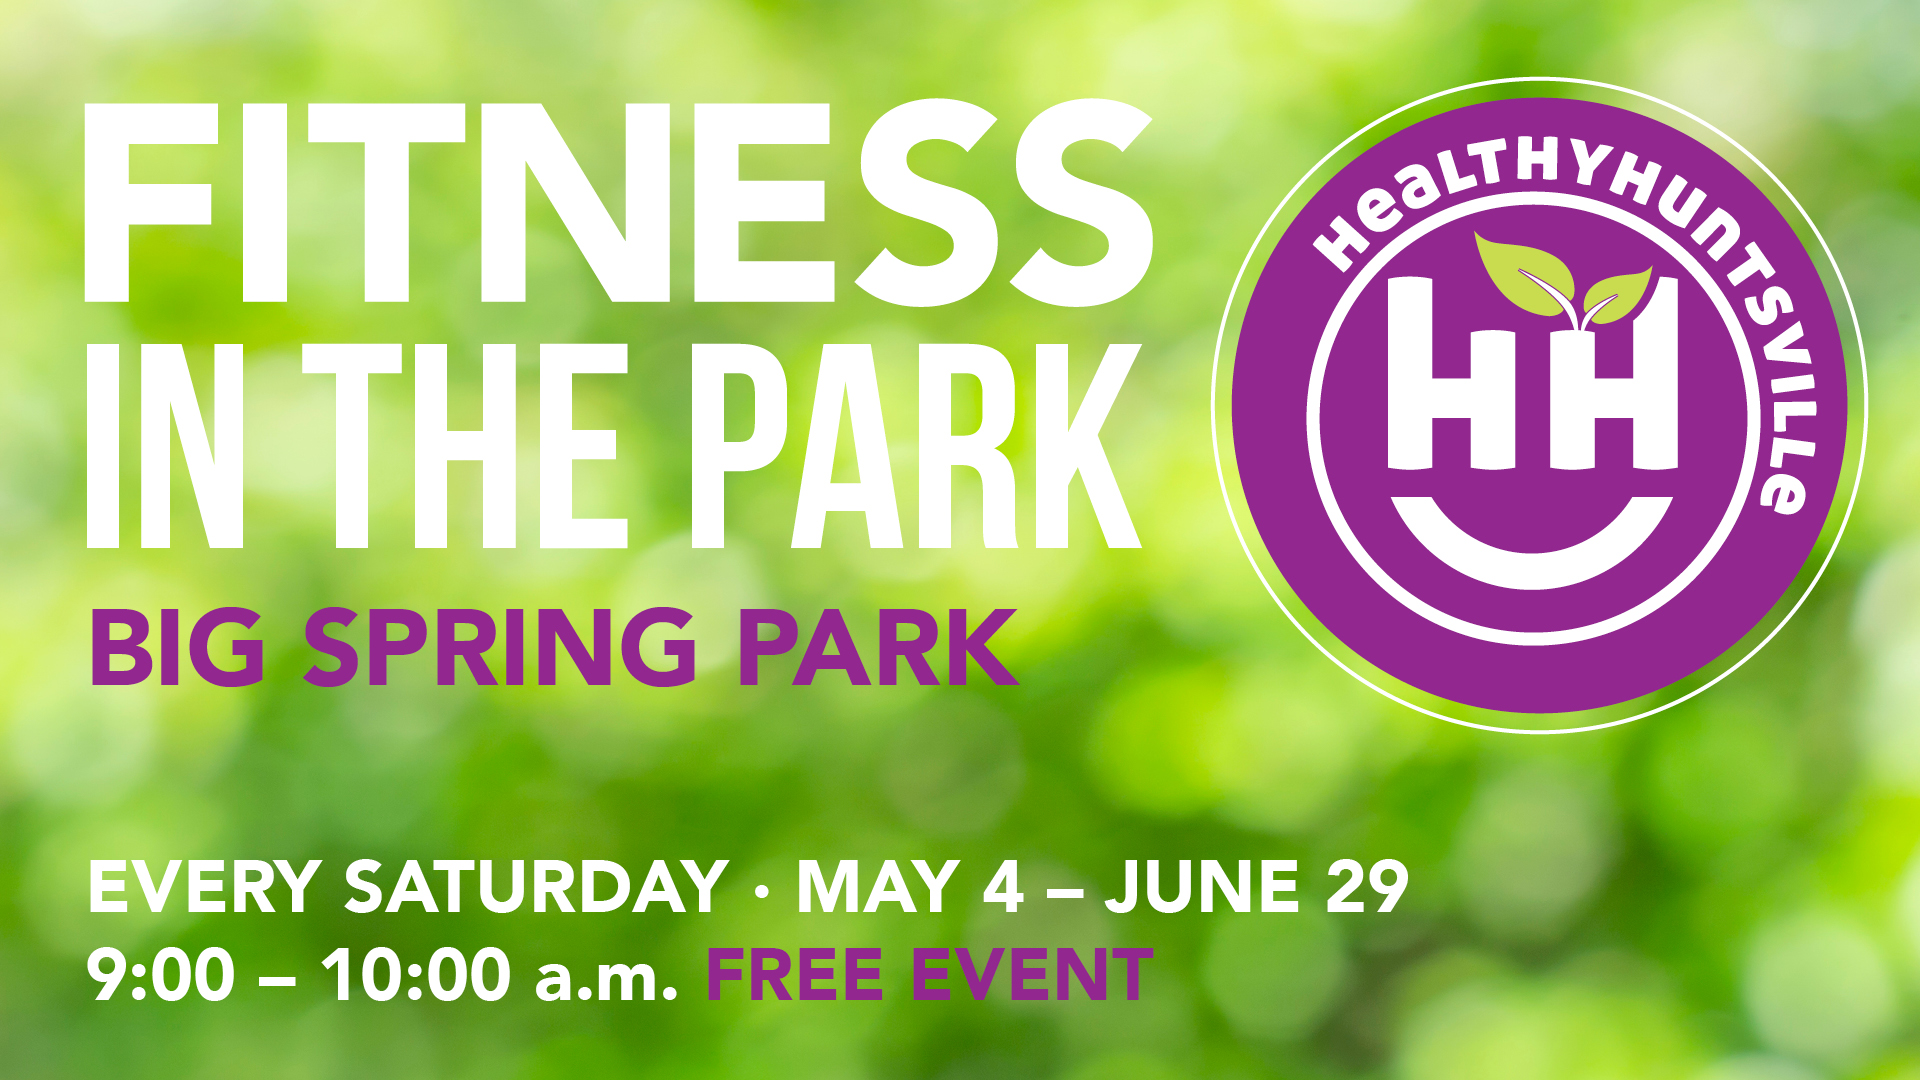 Graphic with blurry green background with the words Fitness in the Park, Big Spring Park, Saturday, May 4 - June 29, 9:00 a.m., FREE EVENT